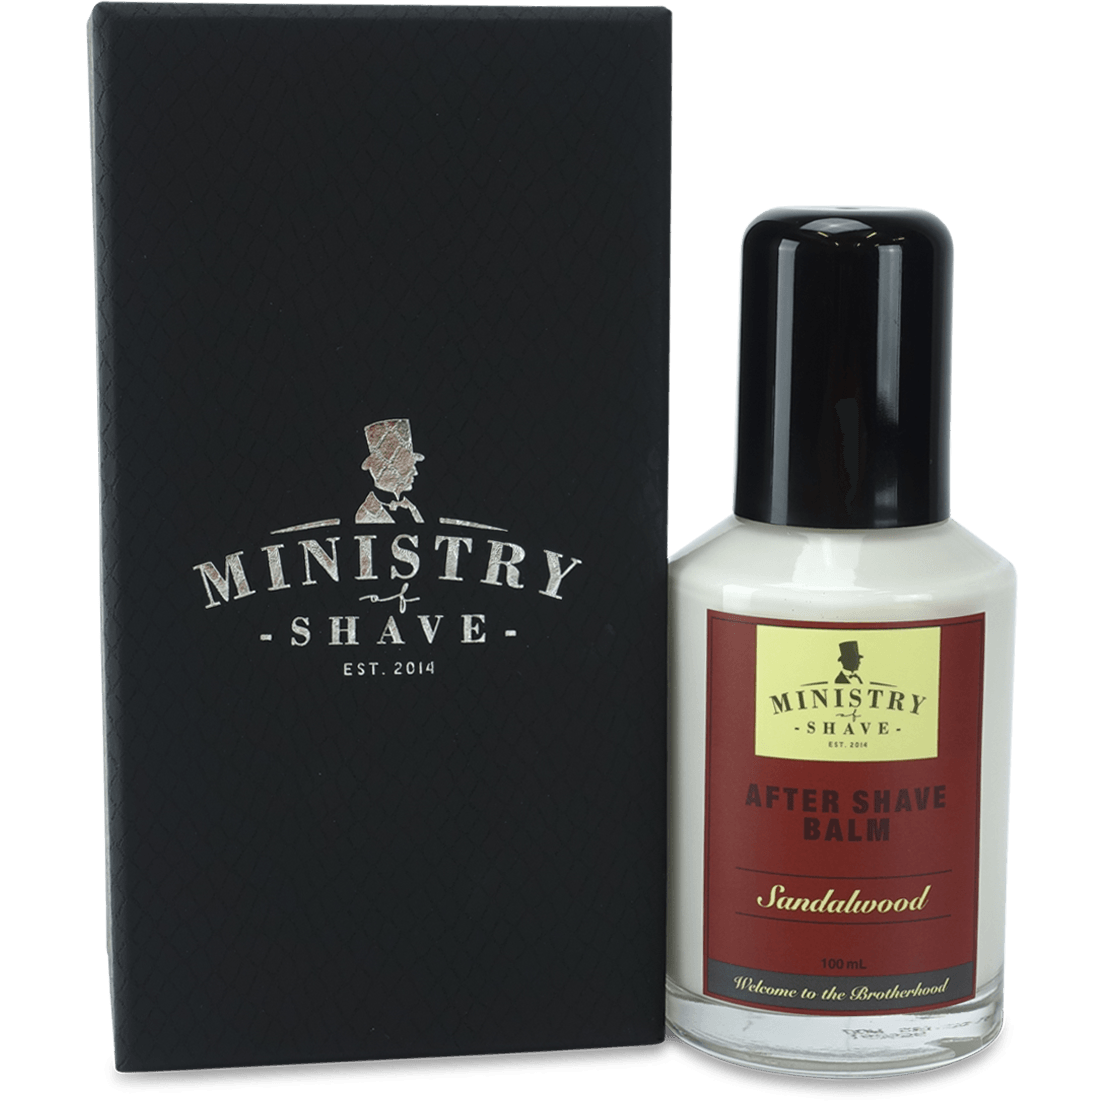 Ministry of Shave Sandalwood After Shave Balm- 100ml - Ministry Of Shave (8430699715)